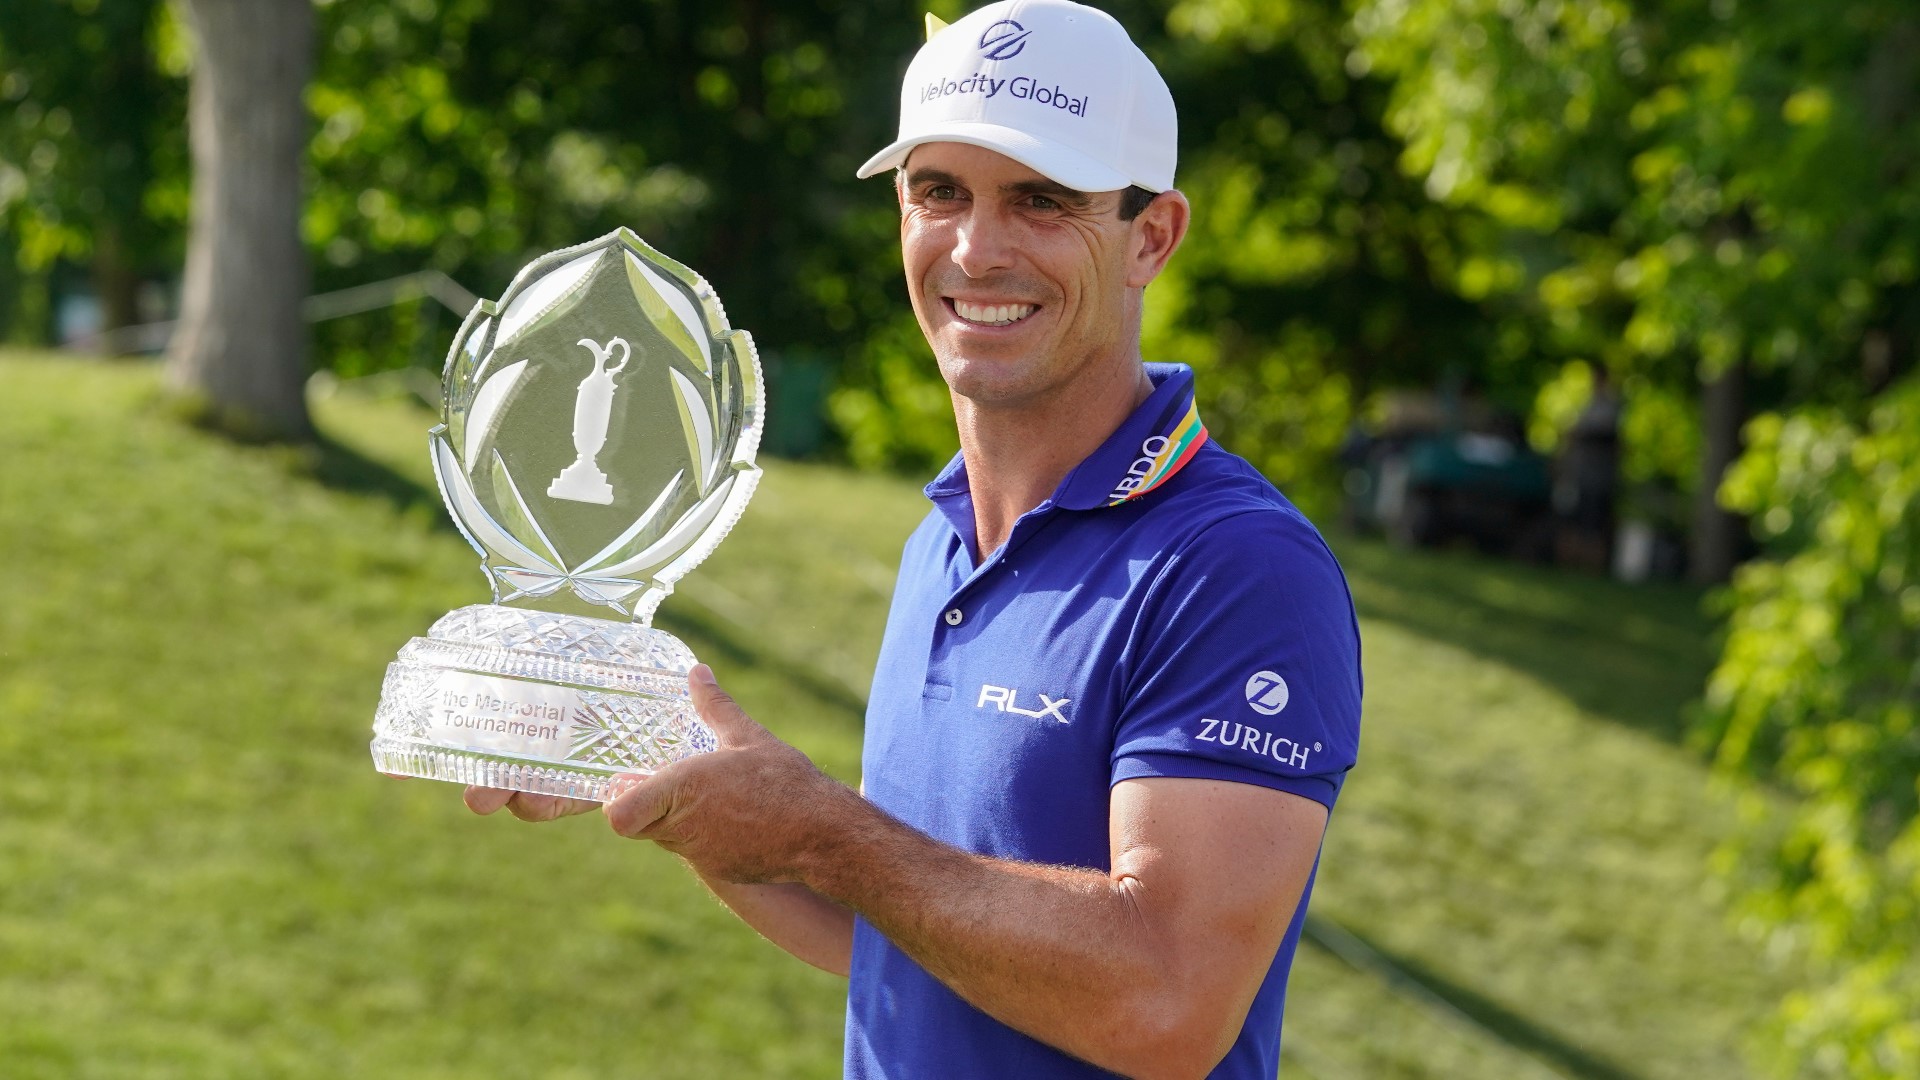 Horschel was staked to a five-shot lead at the start of a sun-soaked final round and no one ever got closer than two shots. He closed with an even-par 72.